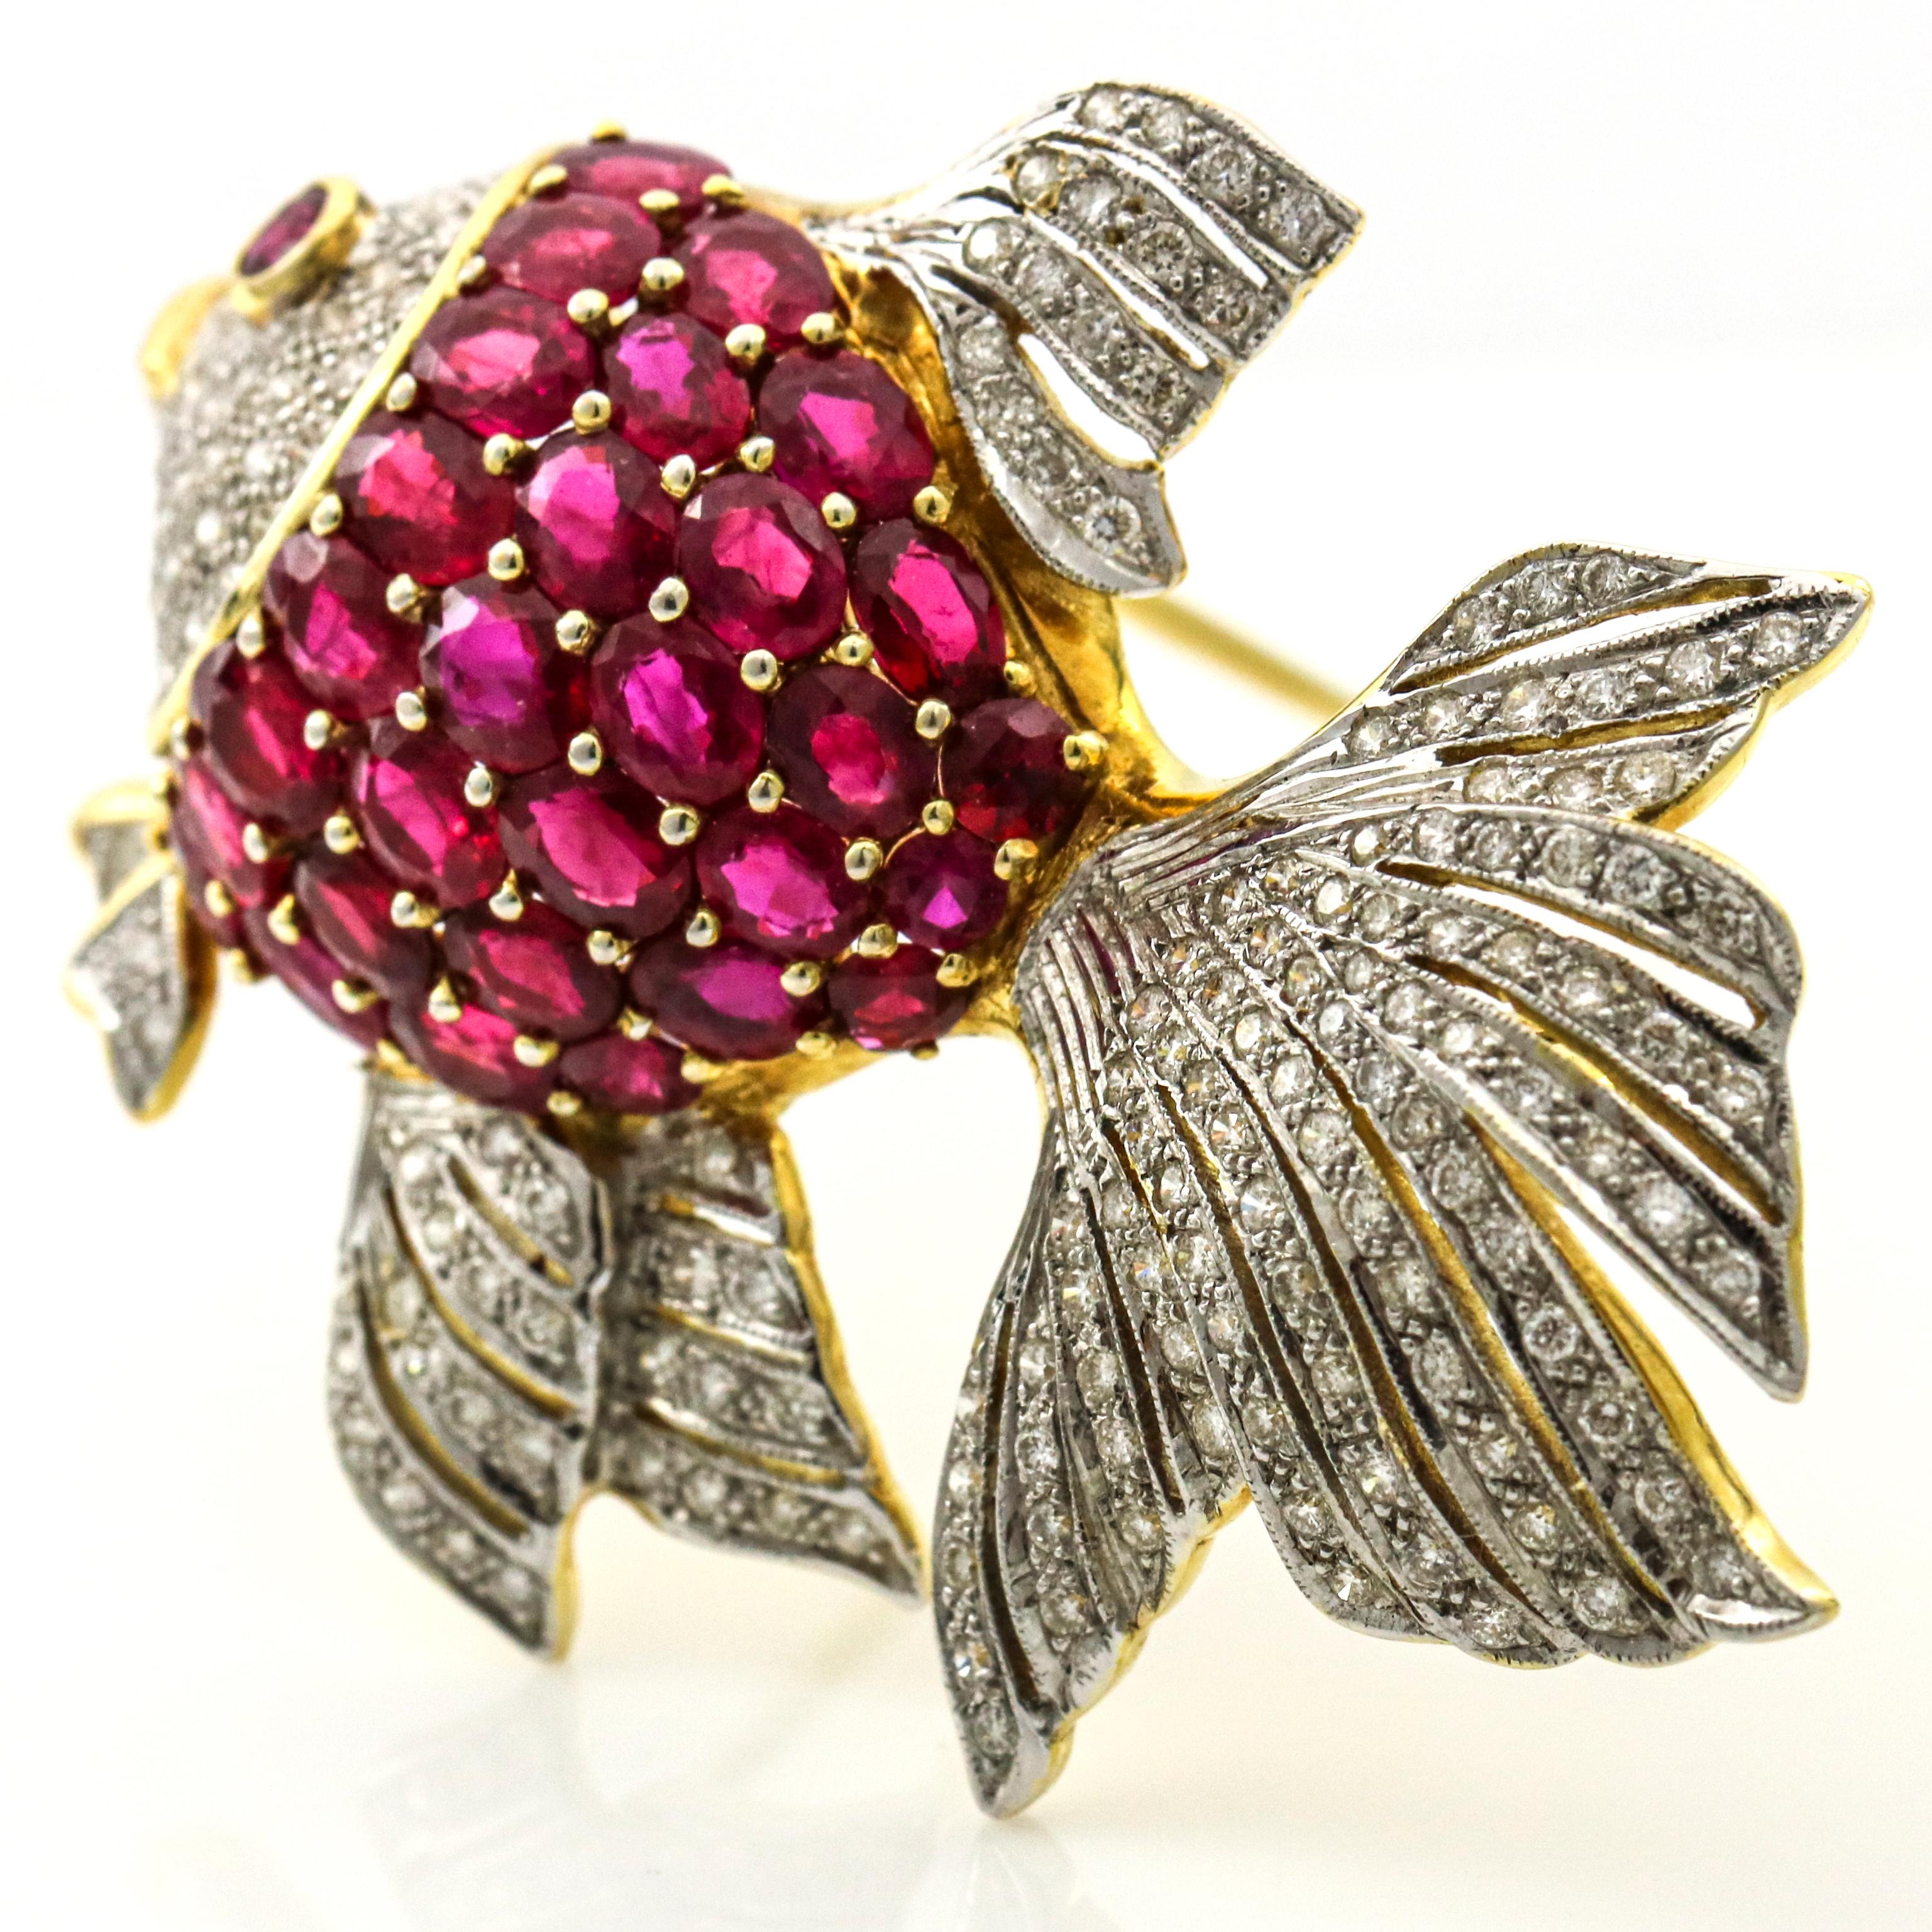 7.75 Carat 18 Karat Gold Ruby Diamond Fish Brooch In Excellent Condition For Sale In Fort Lauderdale, FL